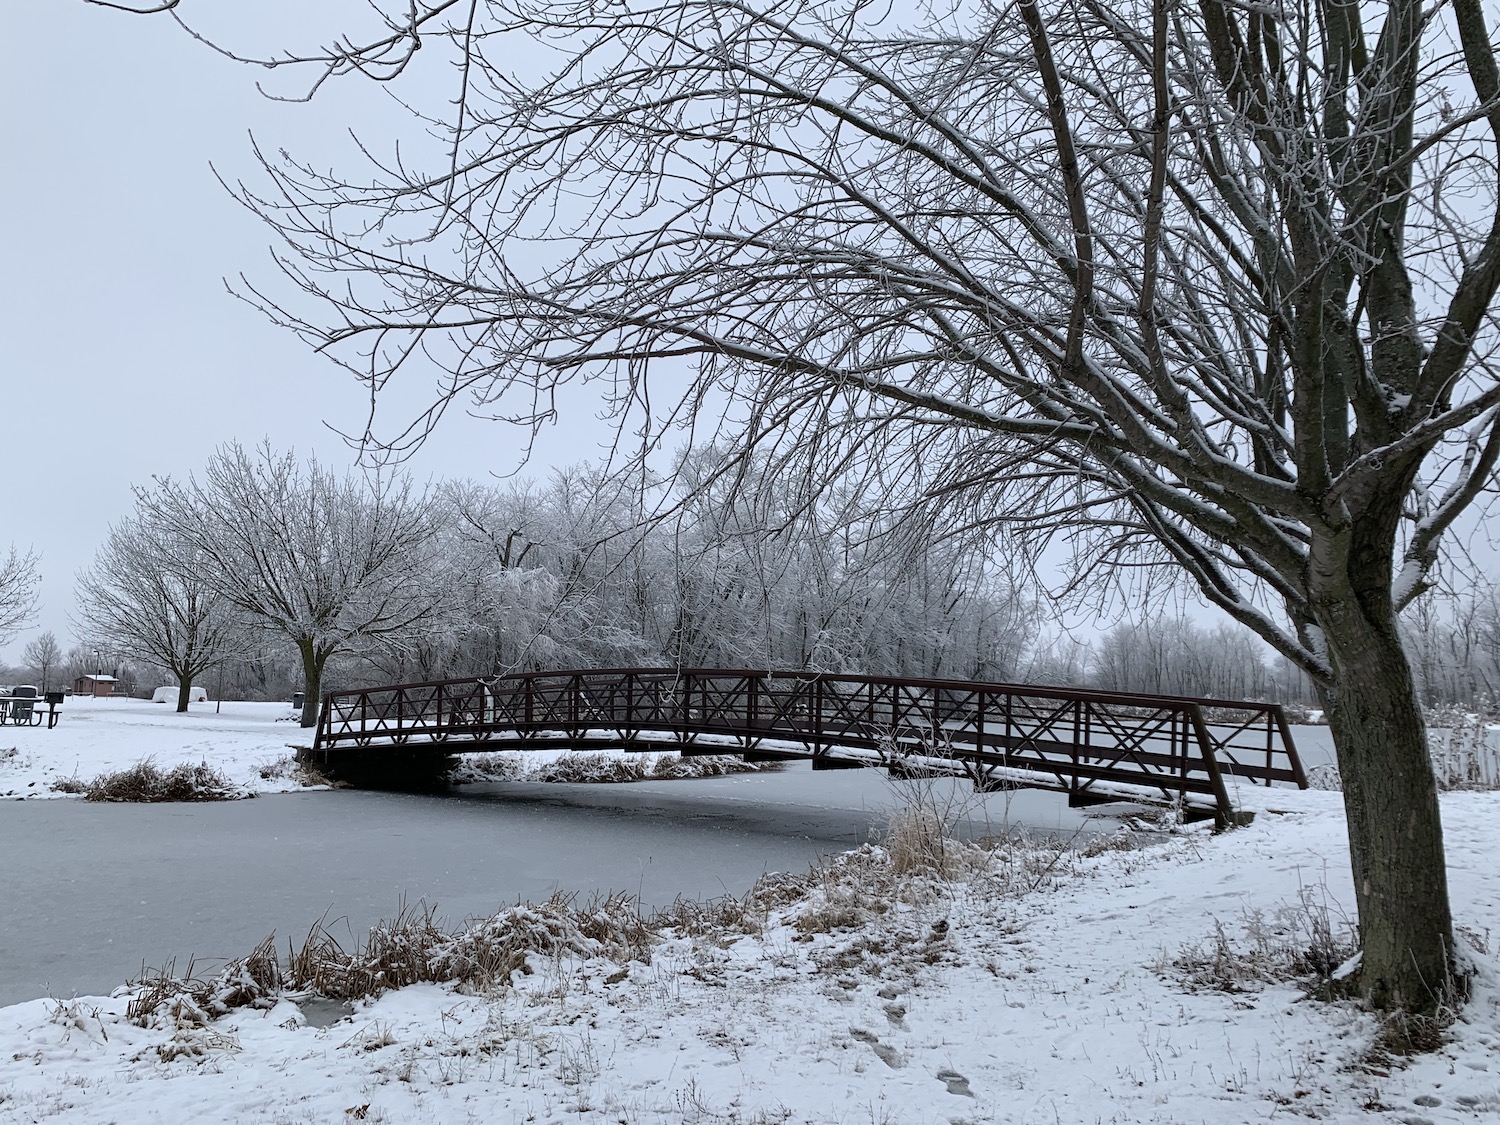 A snow-covered scene with a bridge over a waterway.